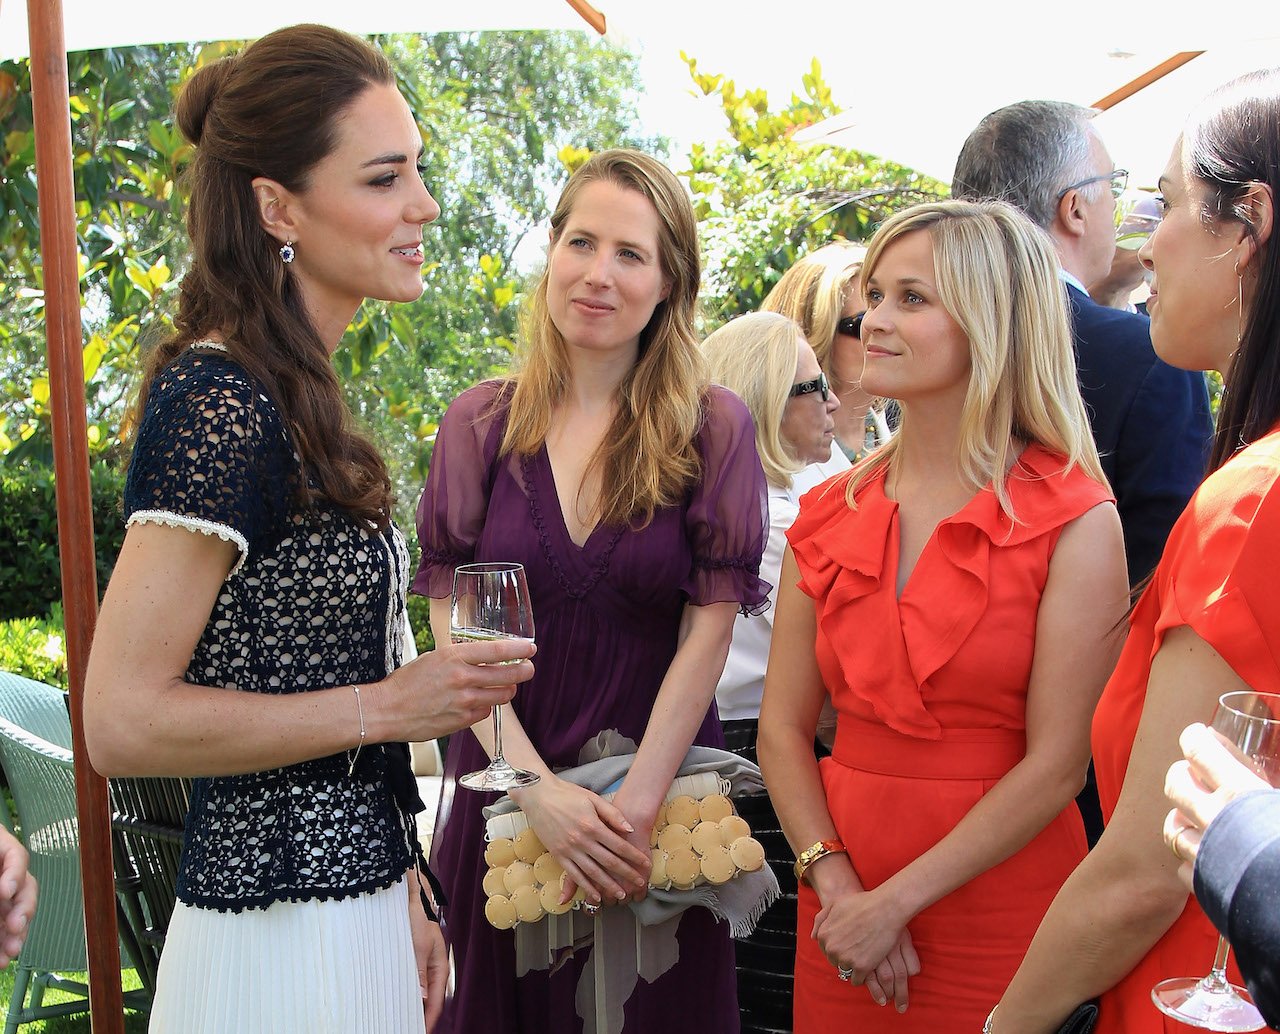 Kate Middleton meets Kristin Gore, Reese Witherspoon, and Jessica De Rothschild.